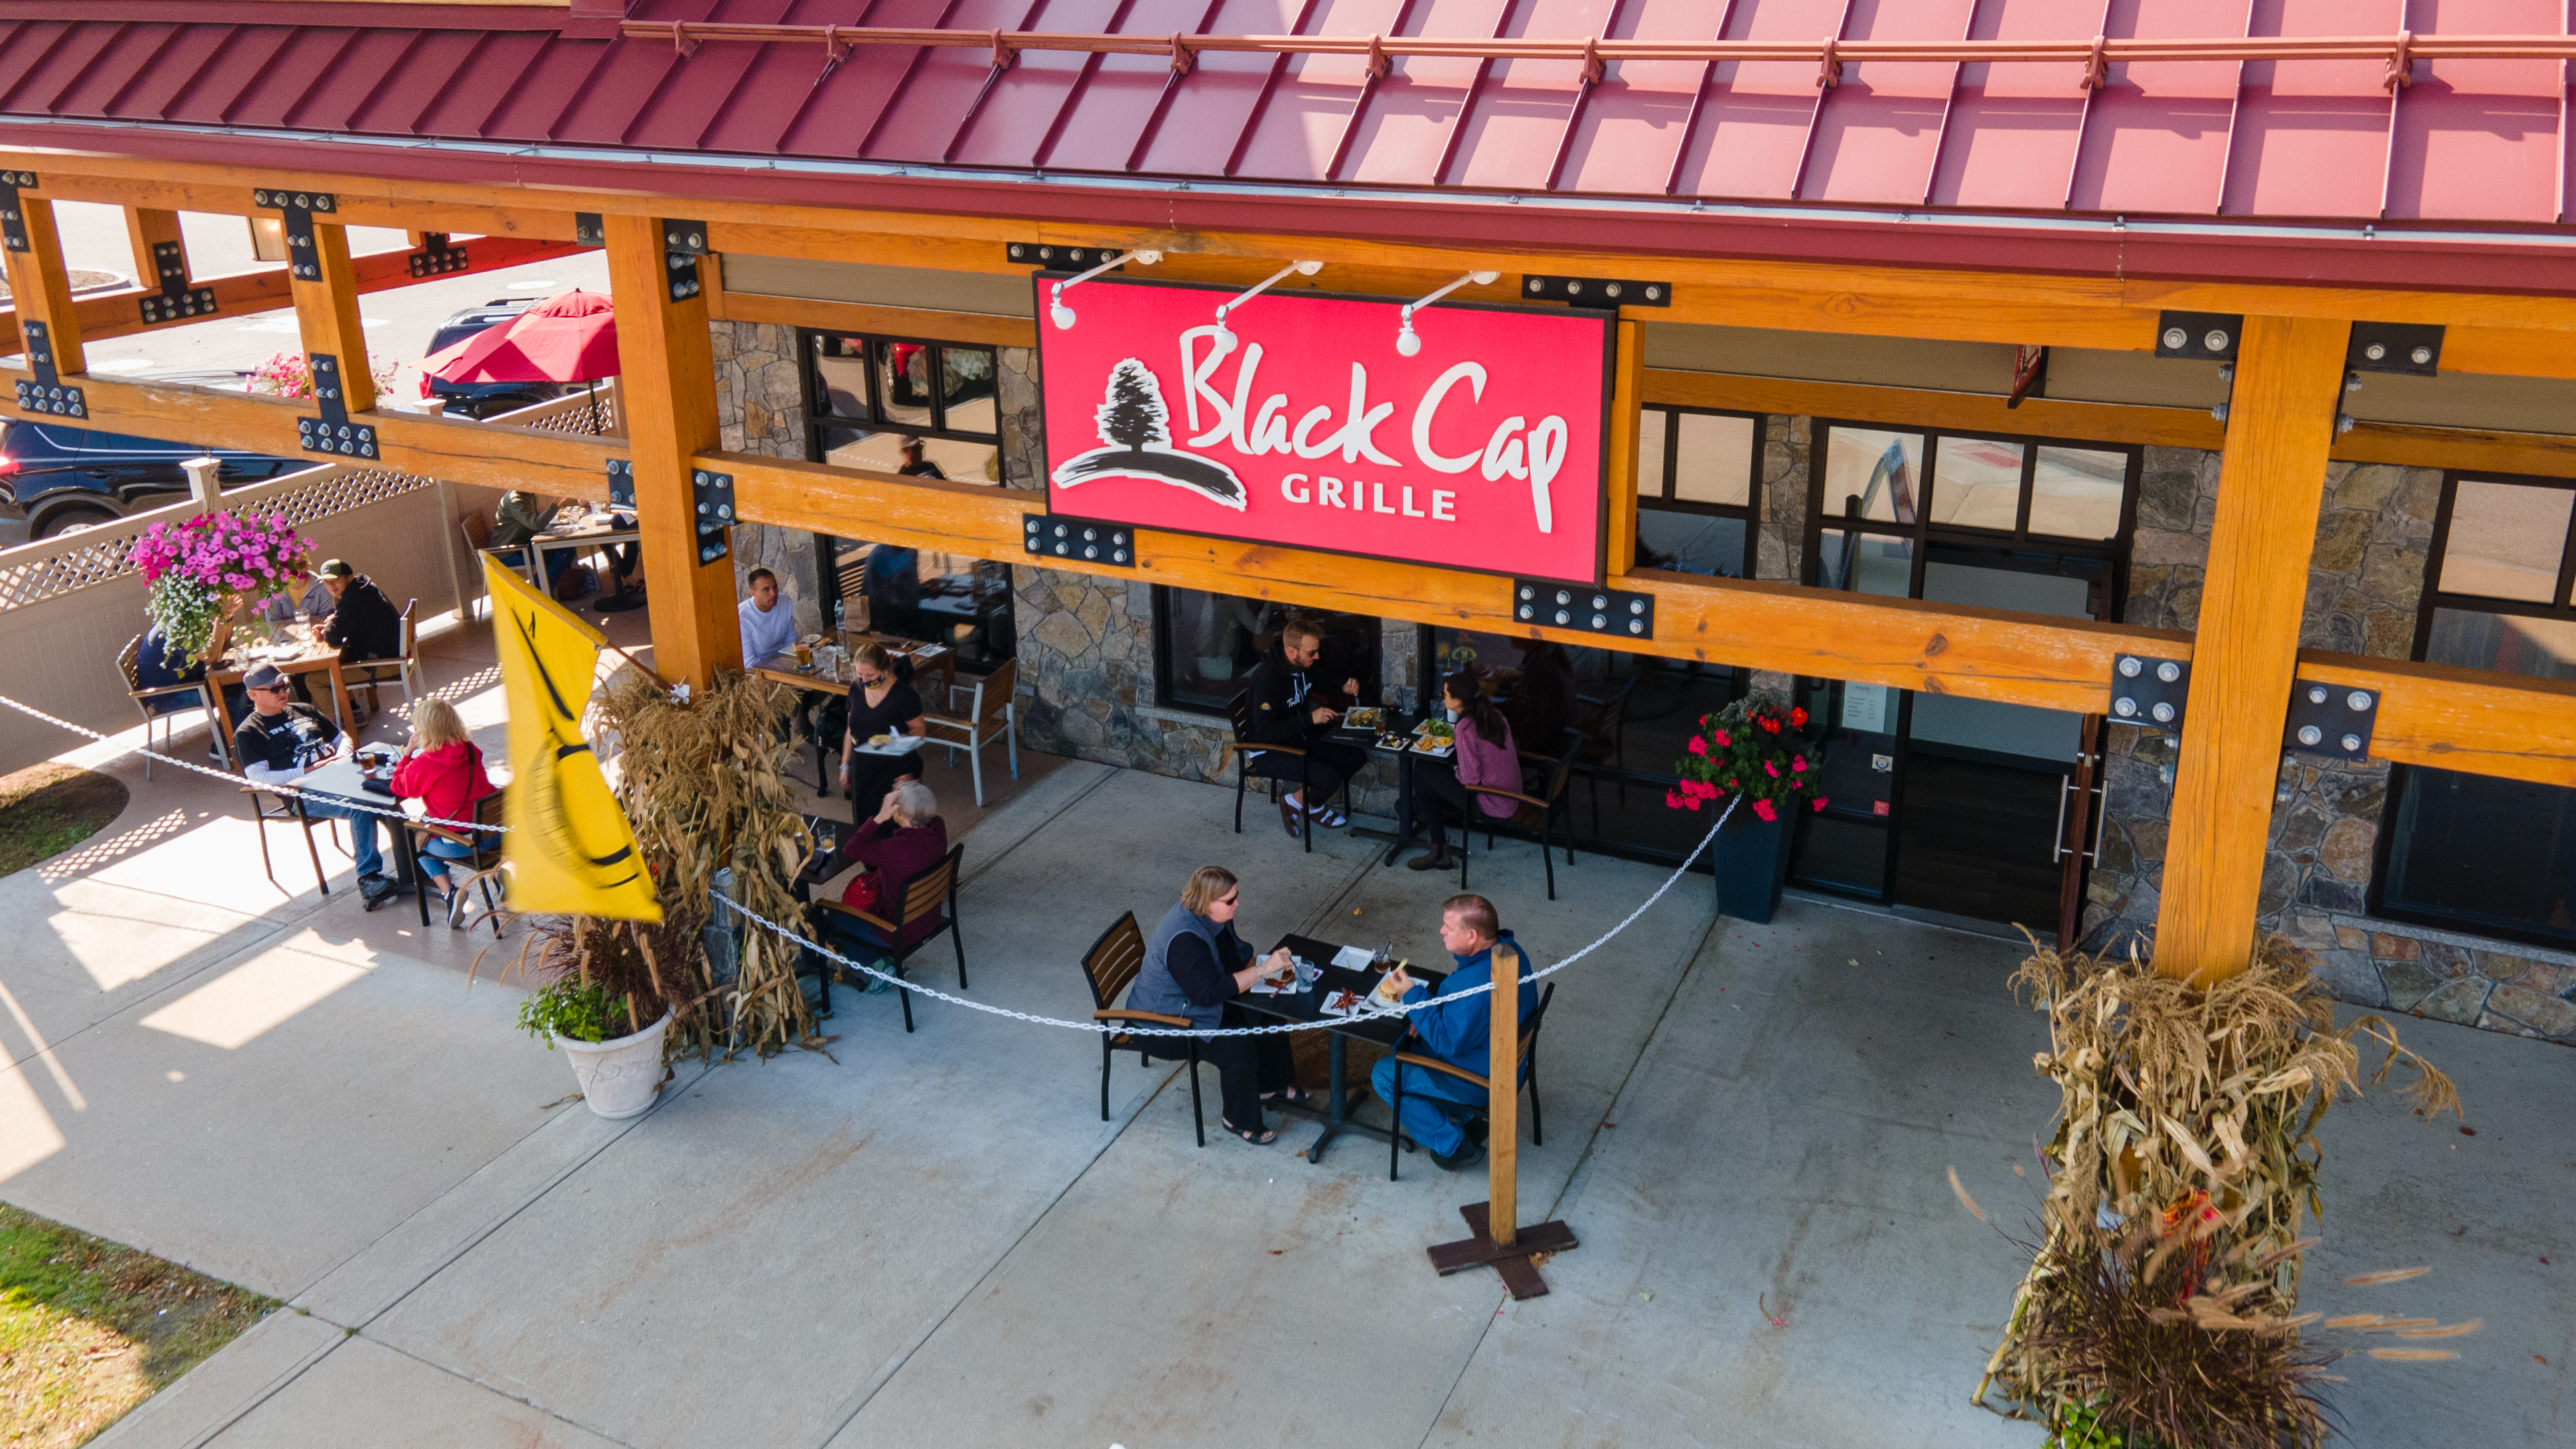 Black Cap Grille is one of three locally owned restaurants.